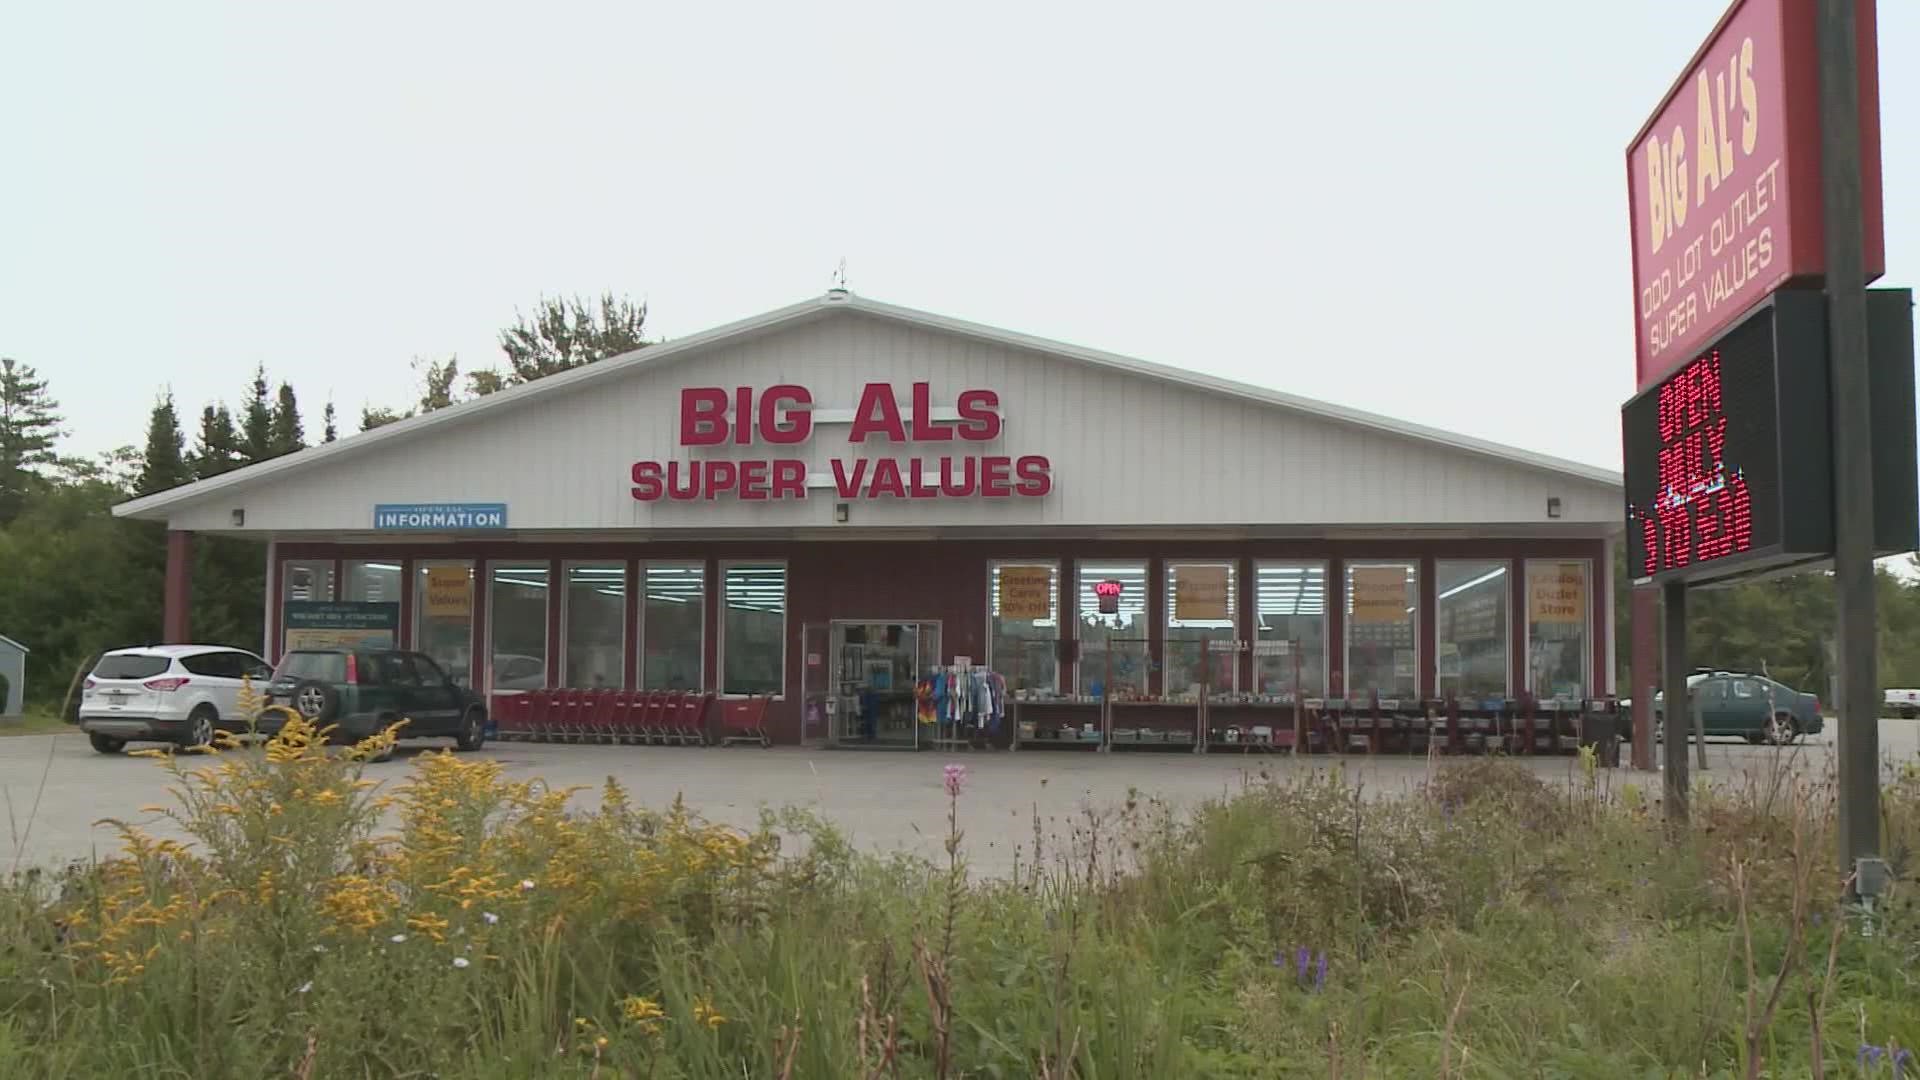 With the exception of L.L. Bean’s boot and the Renys jingle, there may be no more recognizable symbol of Maine retail than Big Al.